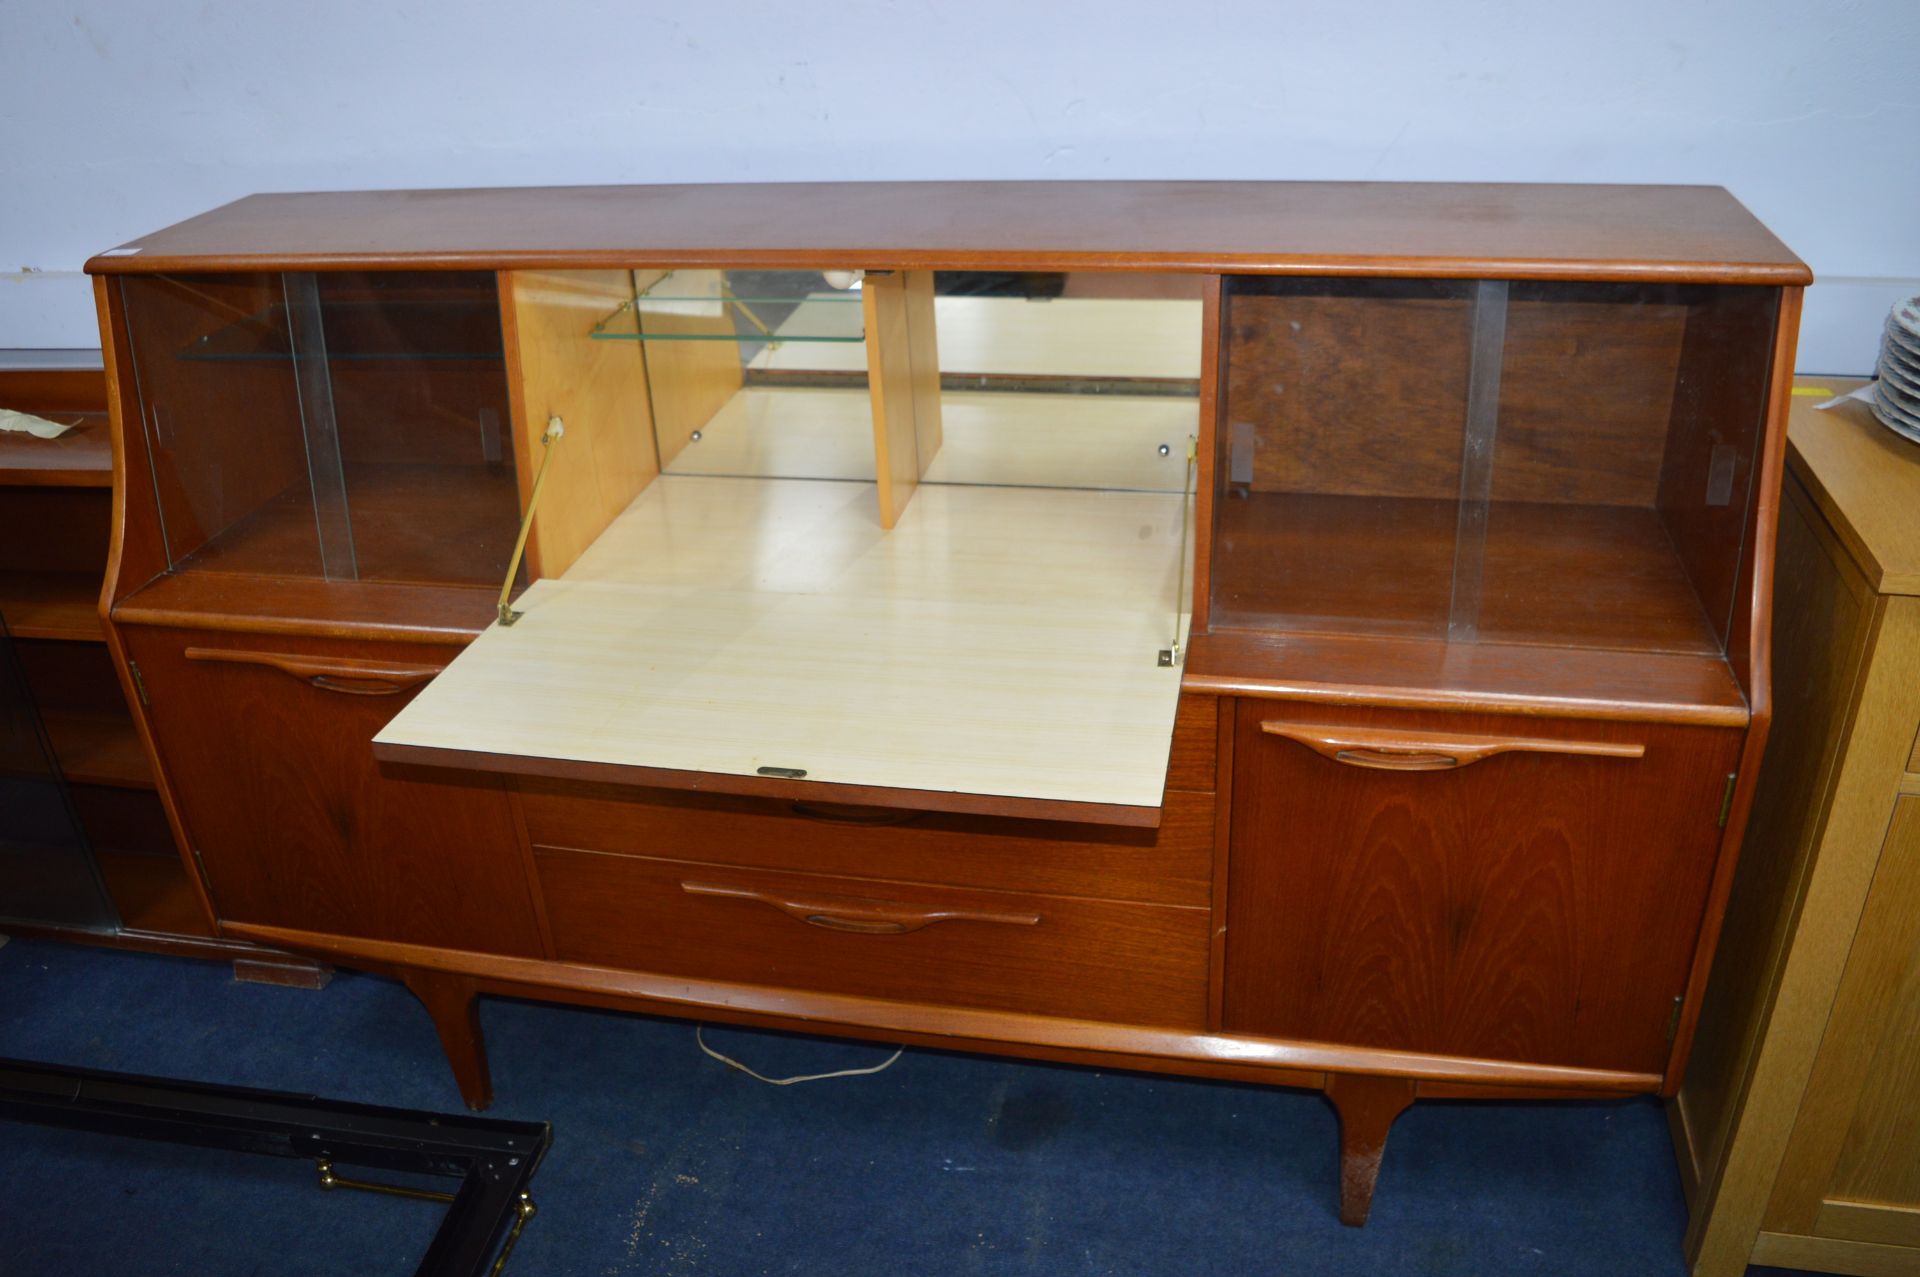 Retro Teak Sideboard with Drop Down Drinks Cabinet - Image 2 of 2